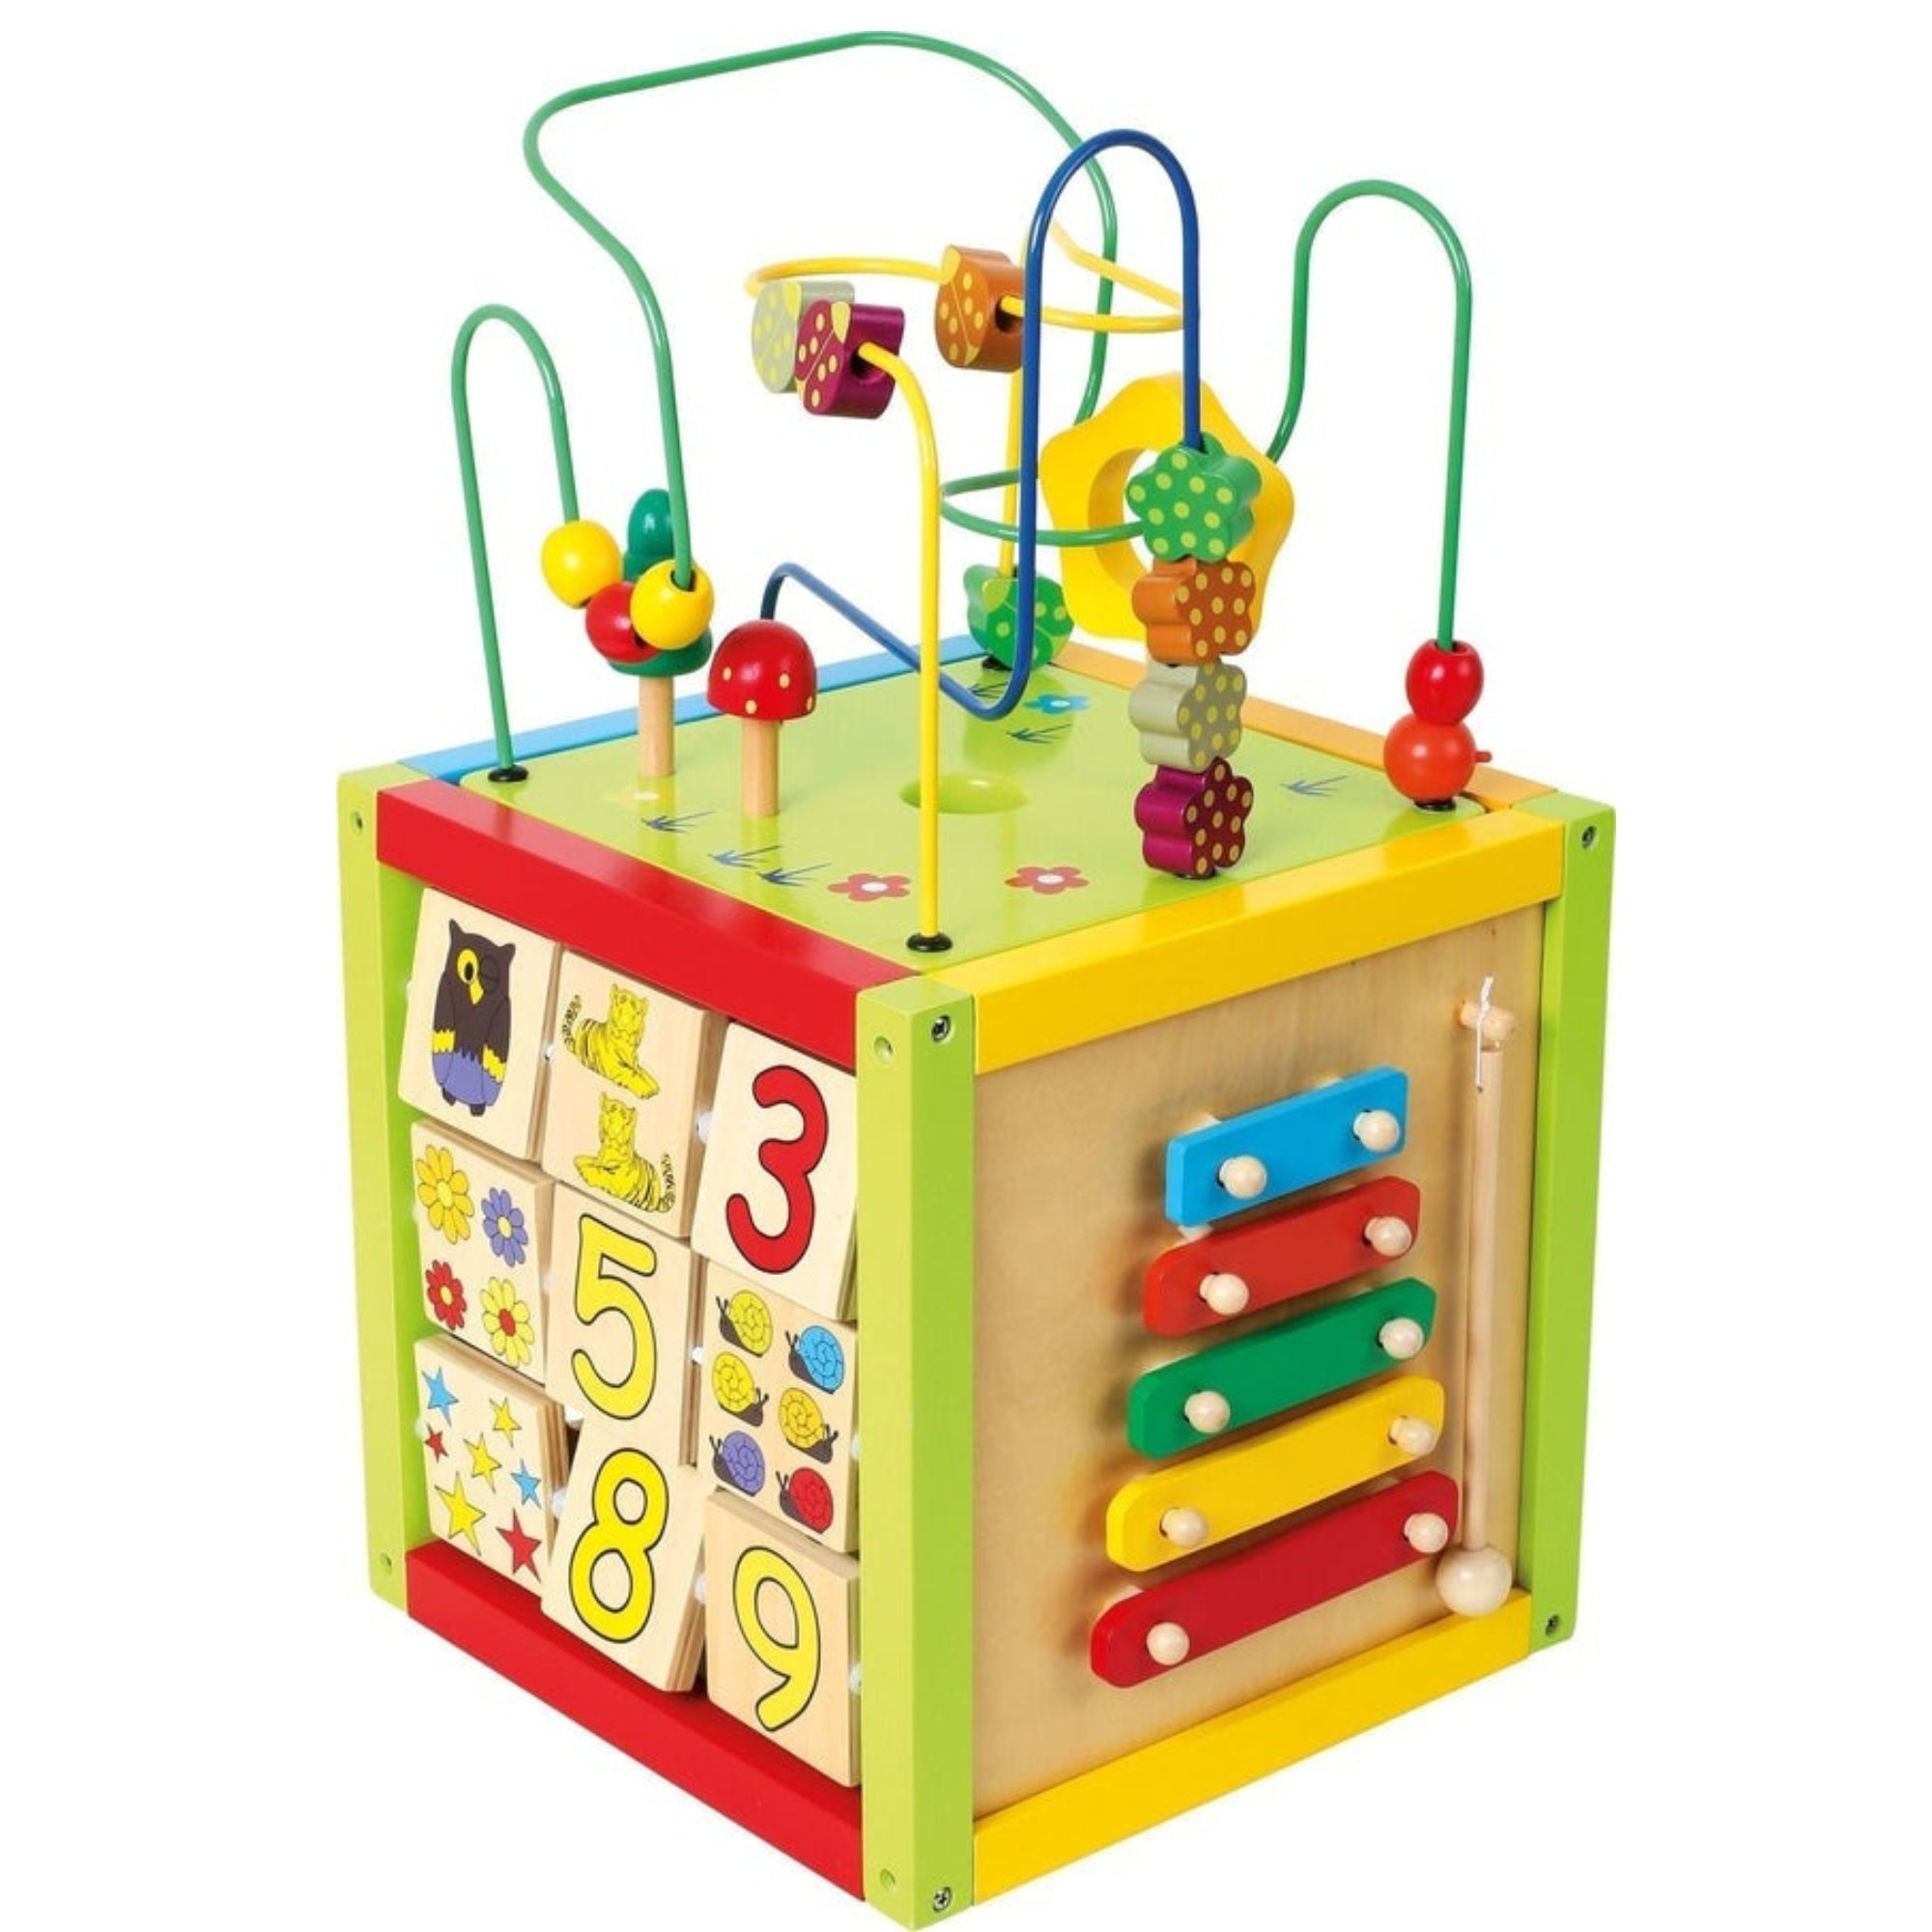 Activity Cube, This Wooden Activity Cube is a treasure trove of fun, offering five sides of diverse playtime activities designed to engage and educate young minds. With features like a xylophone, spinning pieces, chalkboard, and more, this cube is a versatile playground for children to develop their sensory and motor skills. With its convenient size, it allows two children to play simultaneously, making it a fantastic addition to any child's playroom or nursery. Activity Cube Features: 5-in-1 Activity Cube: